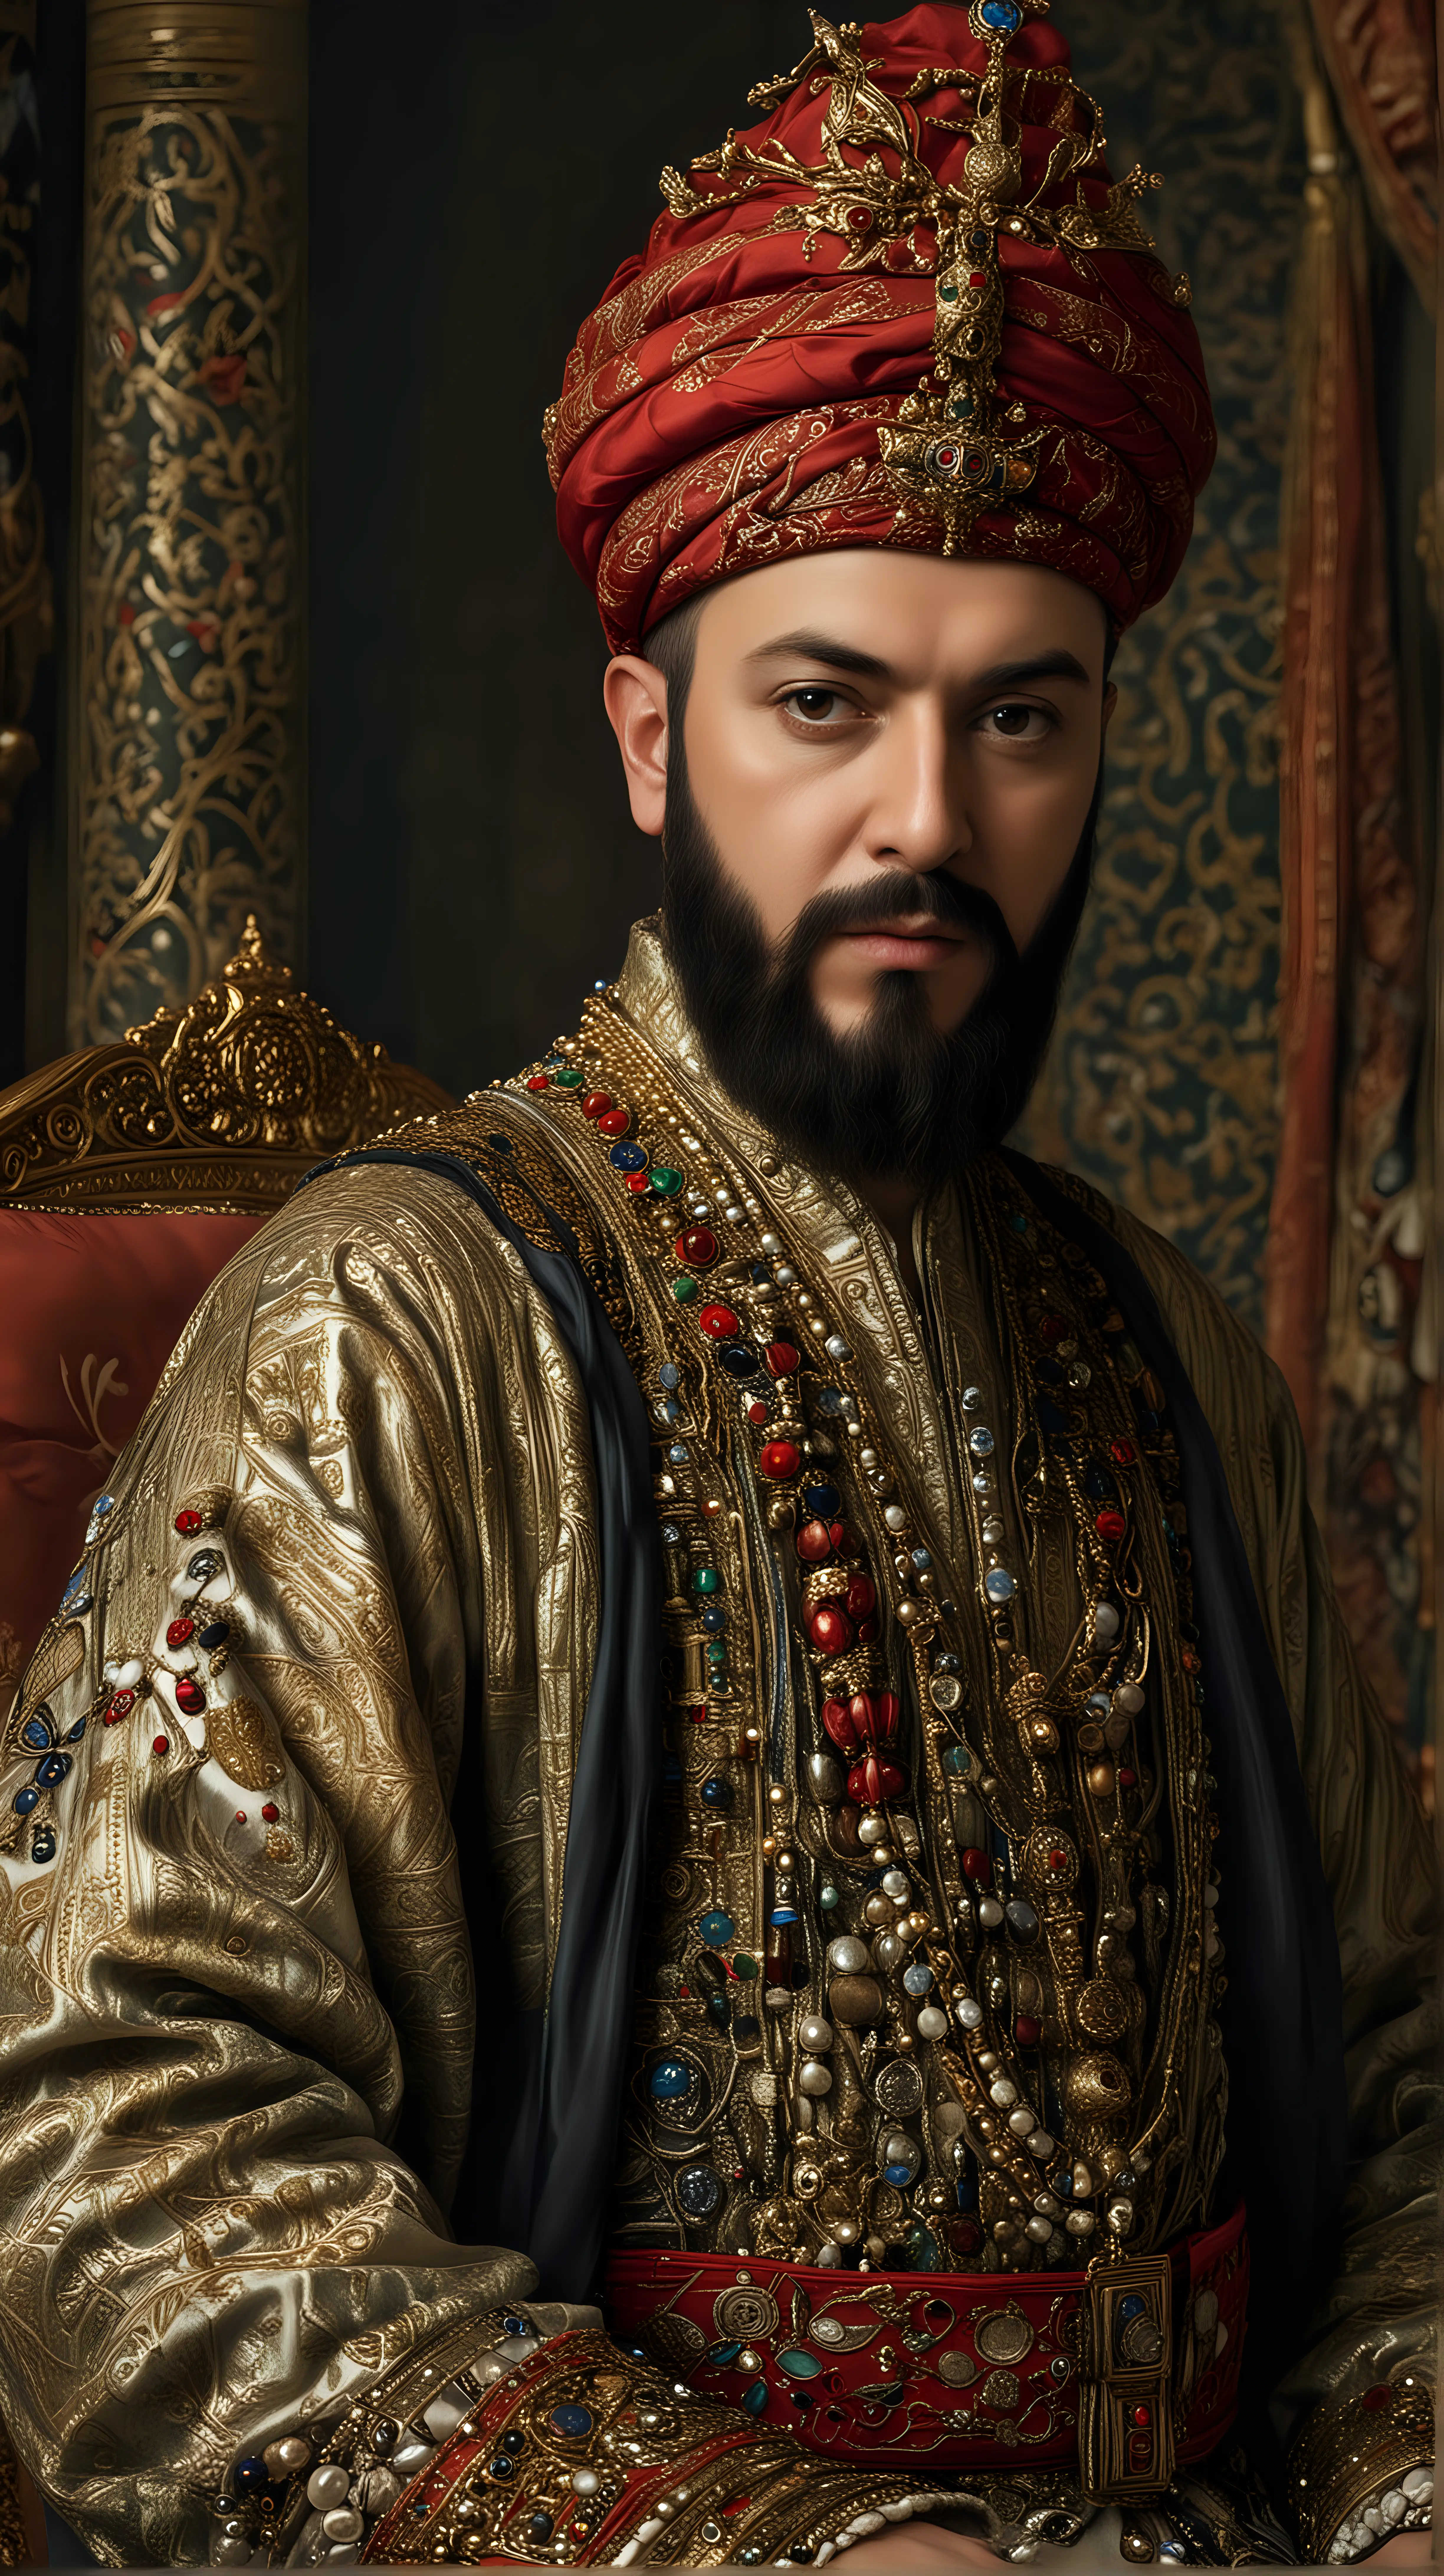 Legacy of Sultan Suleiman Patron of the Arts and Military Strategist